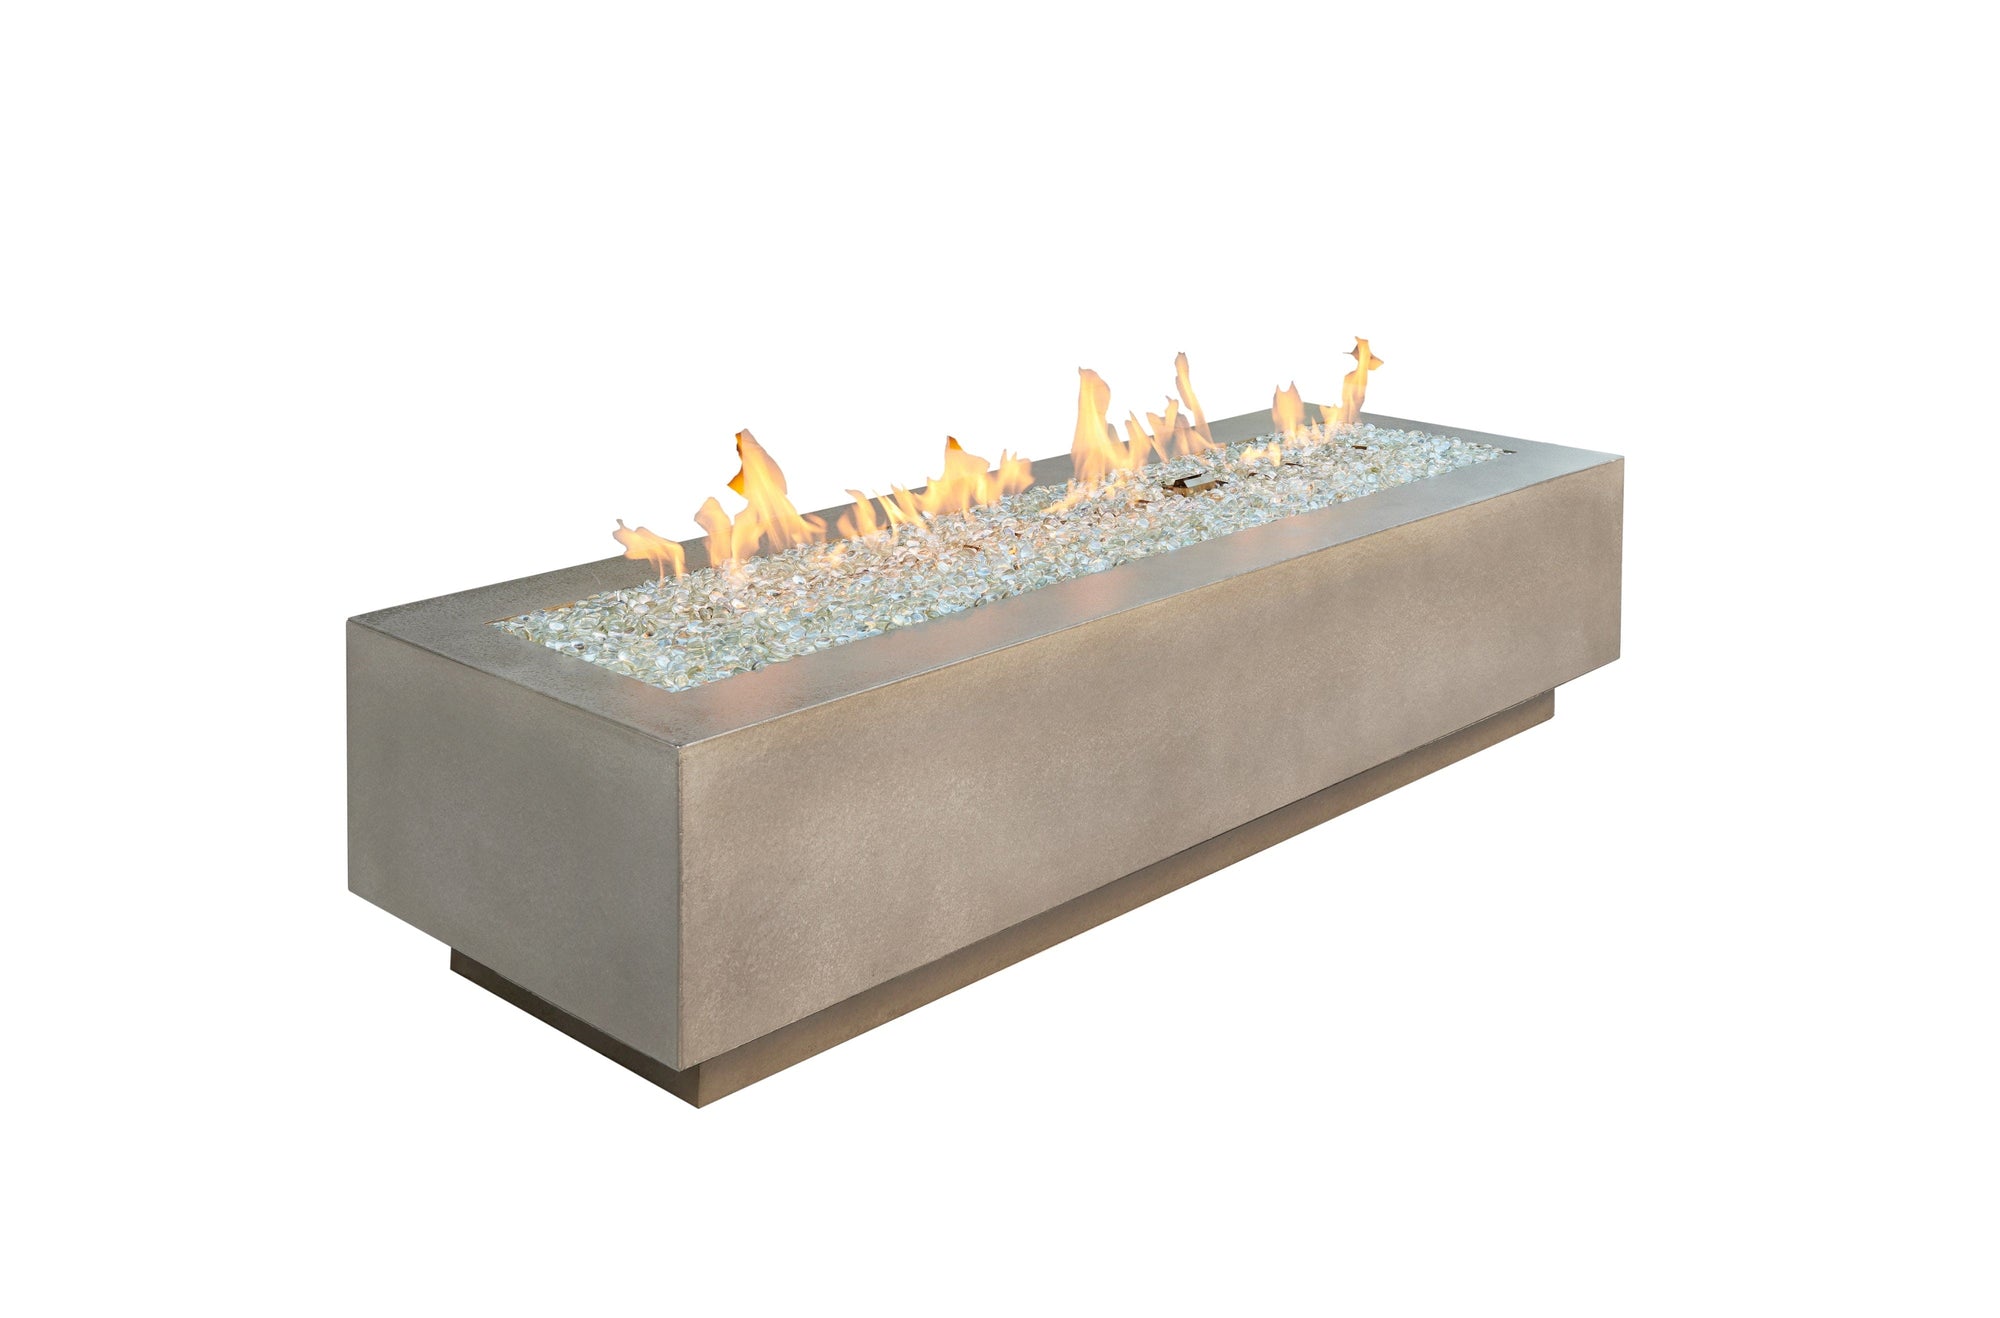 The Outdoor Great Room Fire Features The Outdoor GreatRoom Natural Grey, White, or Midnight Mist Supercast Cove 72" Linear Gas Fire Pit Table / CV-72, CV-72MM, CV-72WT